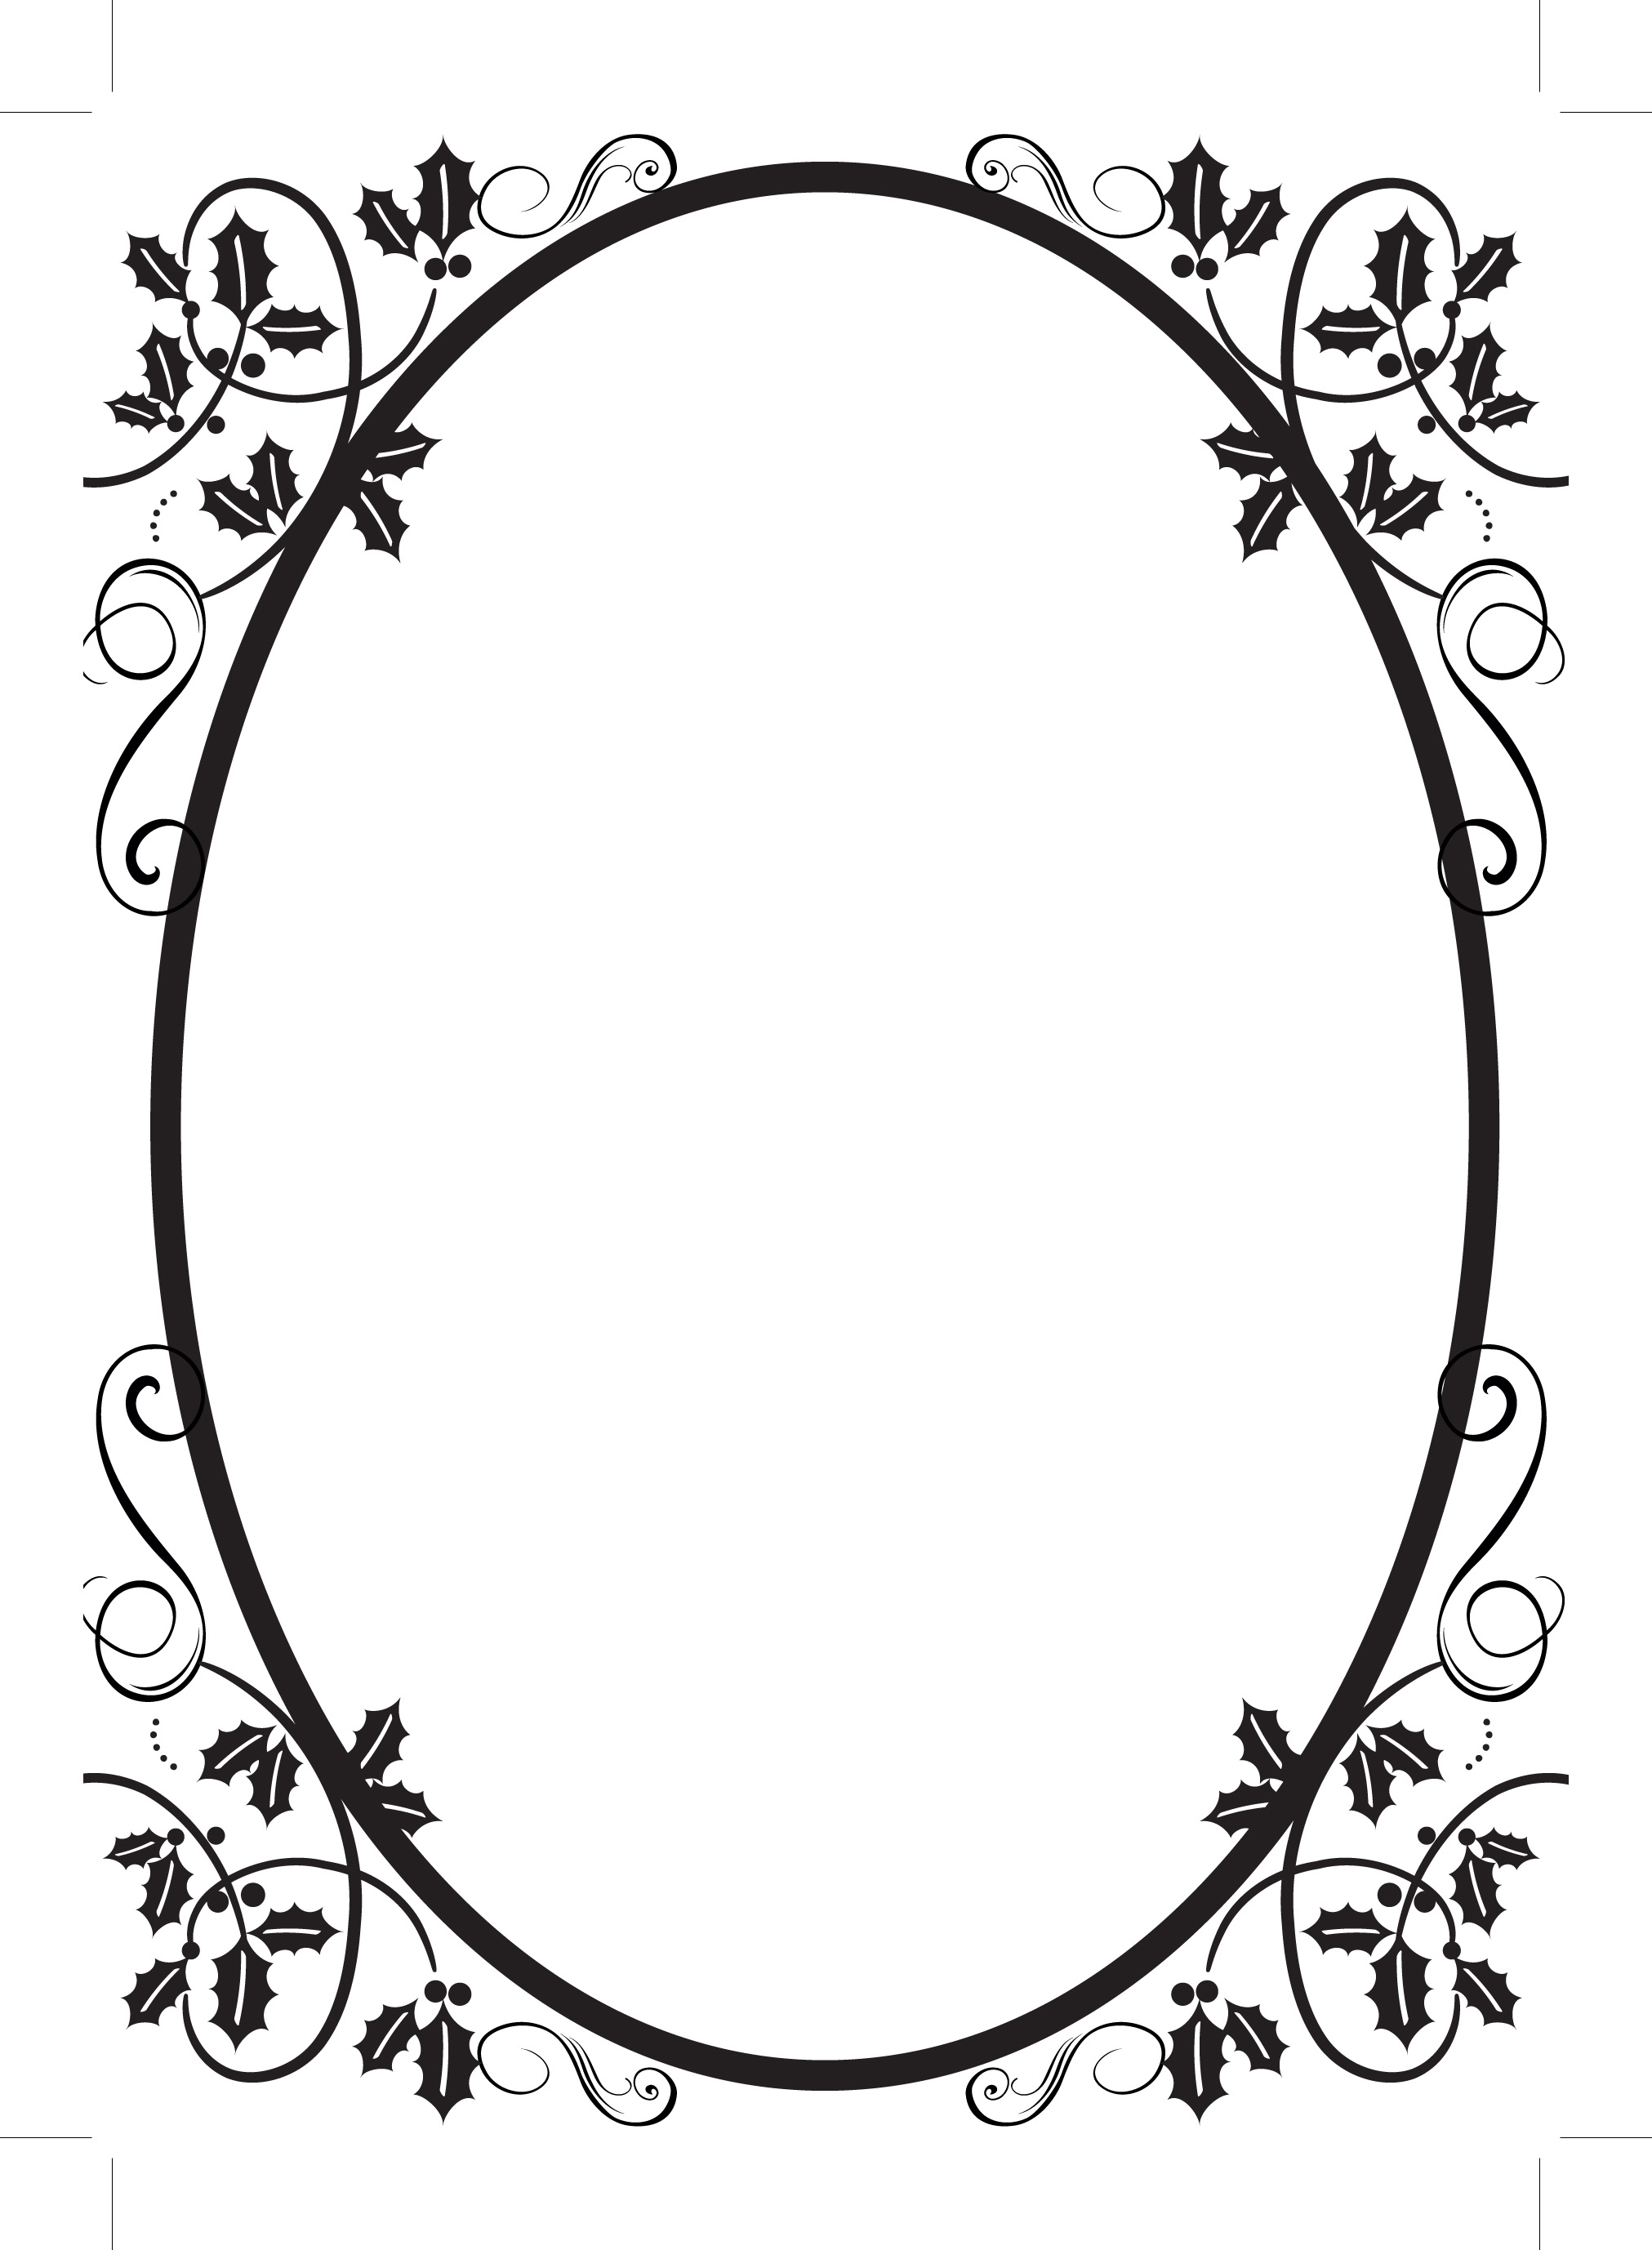 Free Flourish Borders Random Search Png Images Clipart.